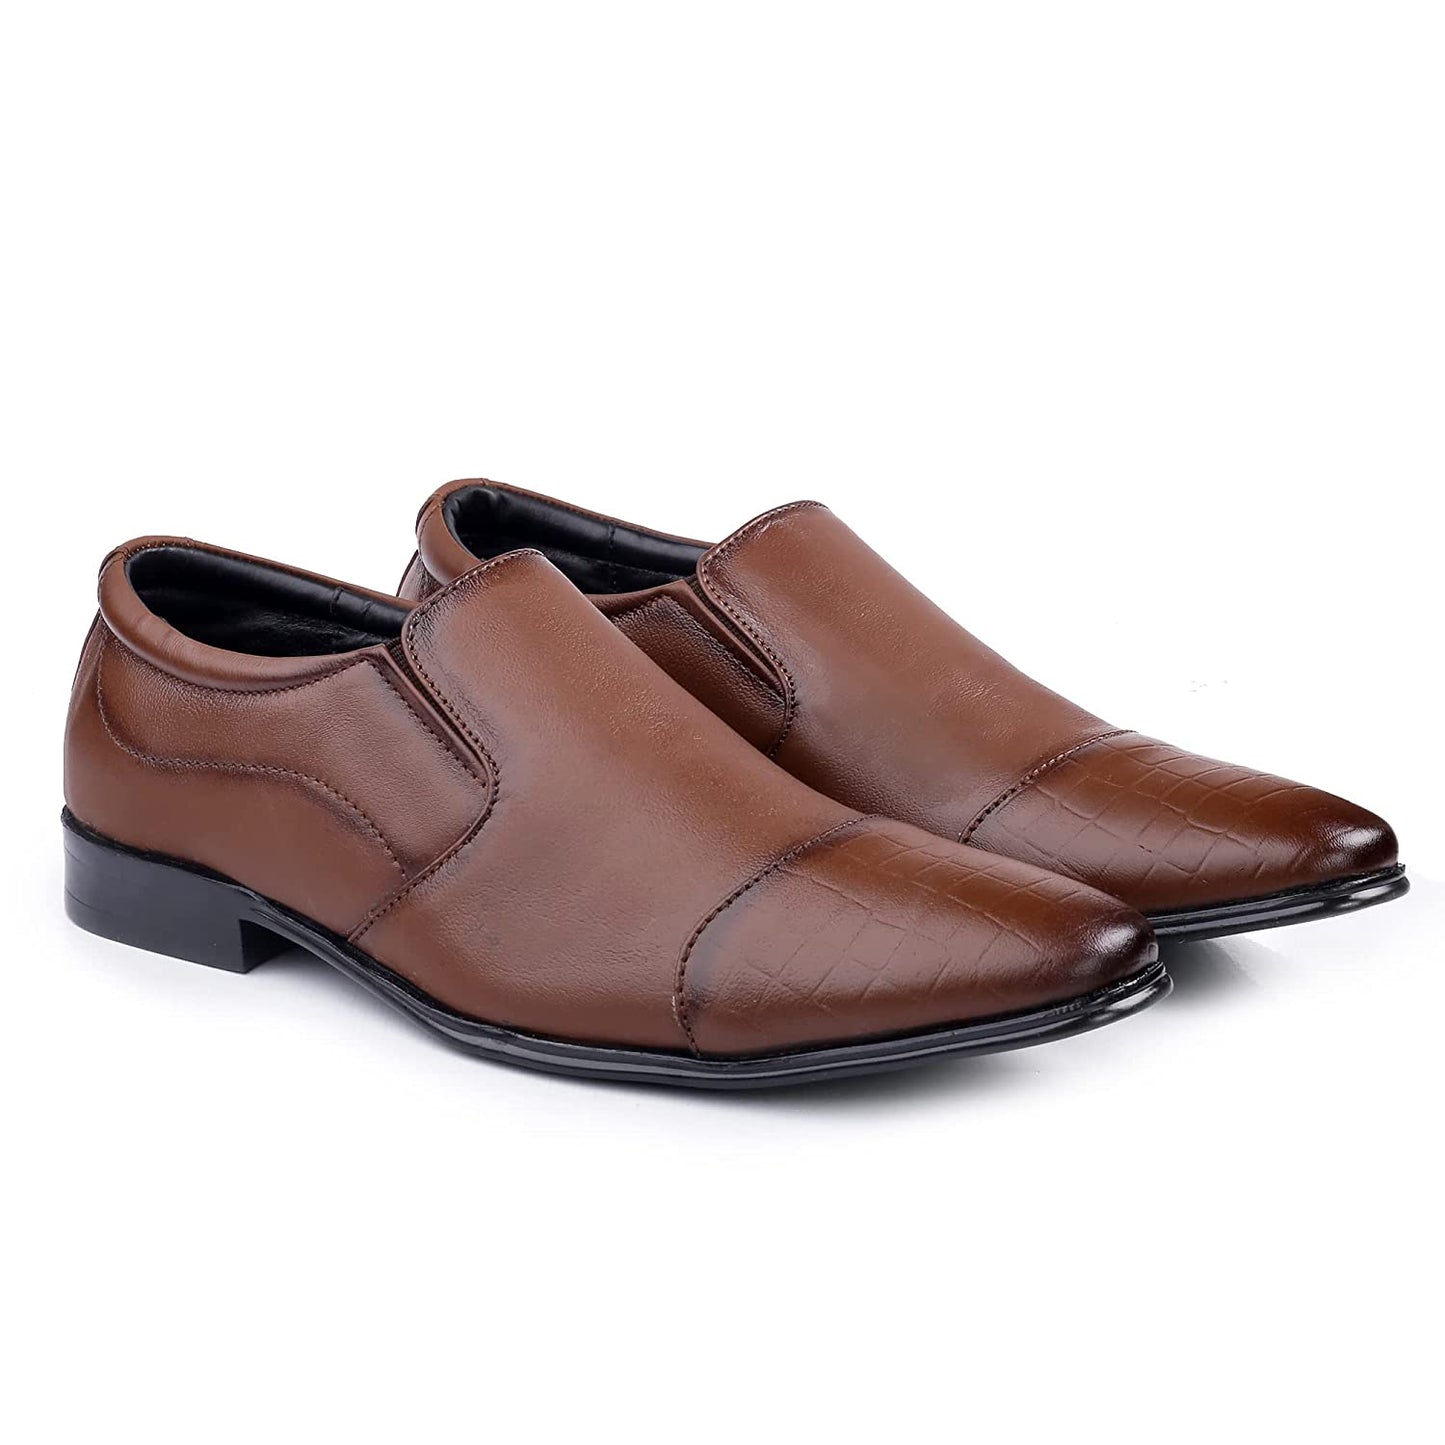 Fashionable Genuine Leather Slip-on Formal Office ,Part Wear Shoes-JonasParamount